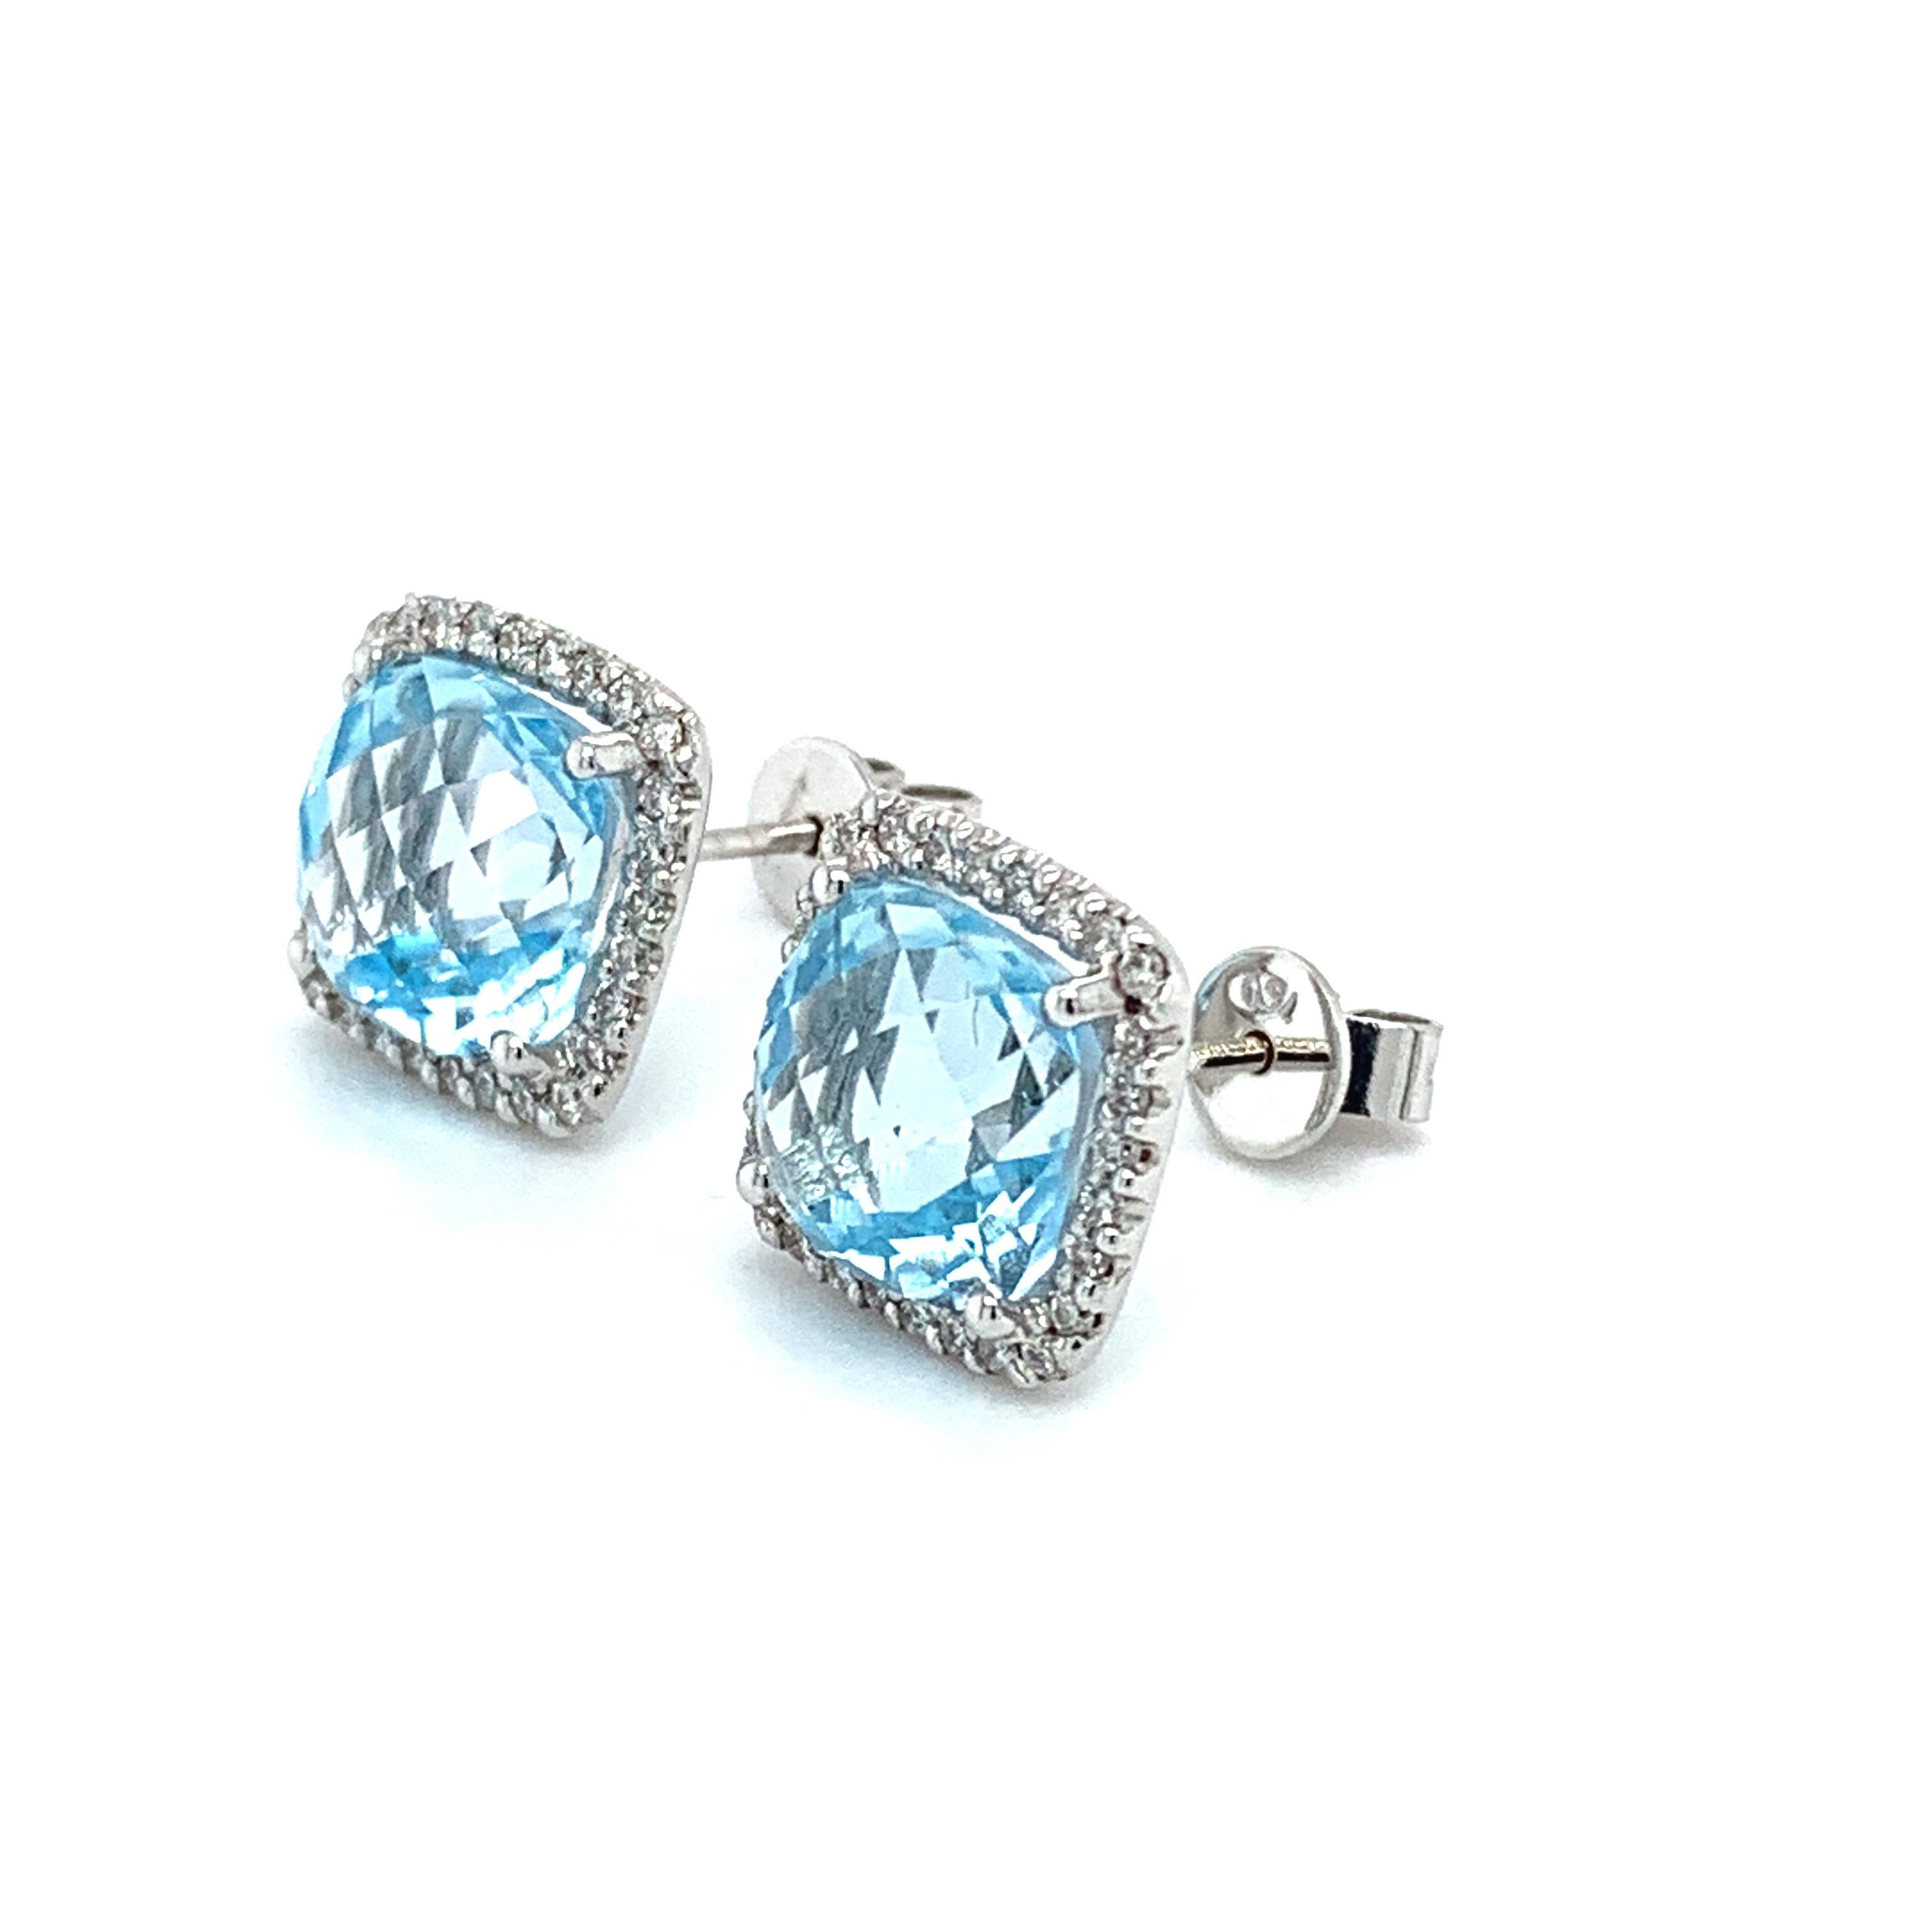 Aquamarine and diamond halo studs earrings in 18ct white gold.
Beautiful sky blue aquamarine gemstone cushion shaped natural untreated gemstones with soft corners accented by round brilliant cut diamonds around it all set in 18ct white gold
Total